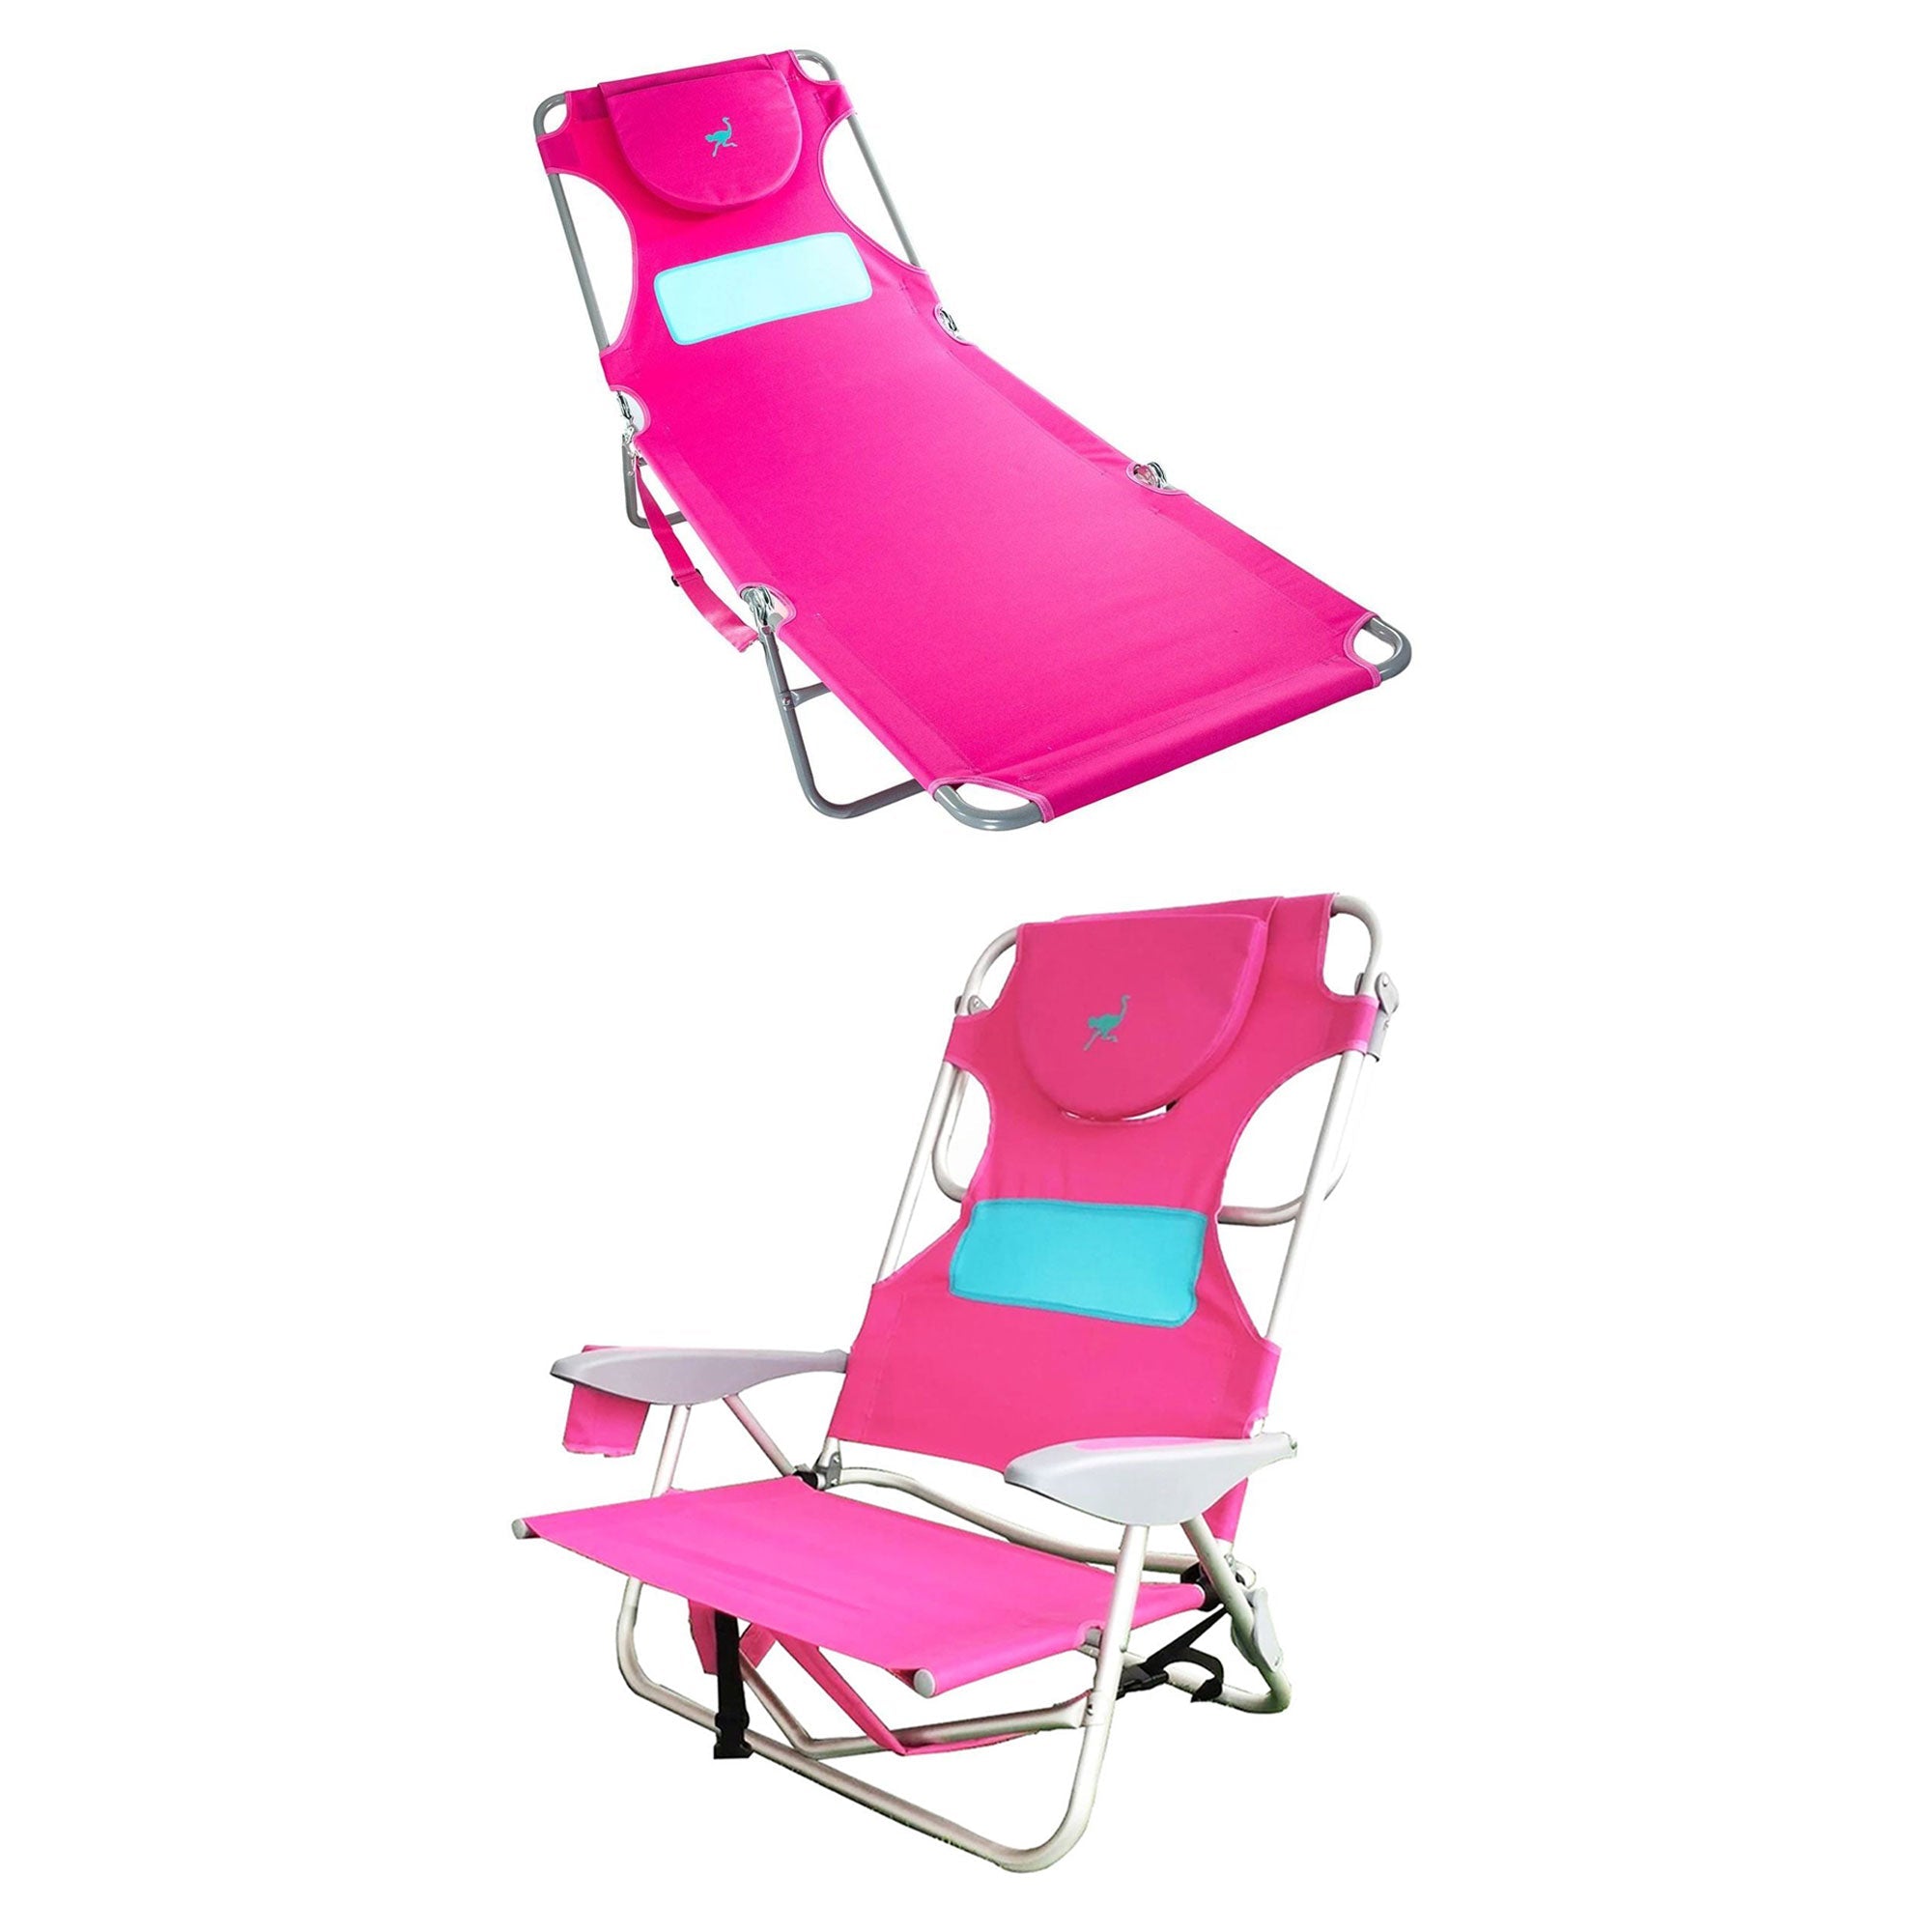 Ostrich-Ladies-Comfort-Lounger-Face-Down-Beach-Chair-&-on-Your-Back-Chair,-Pink-Chairs-&-Seating